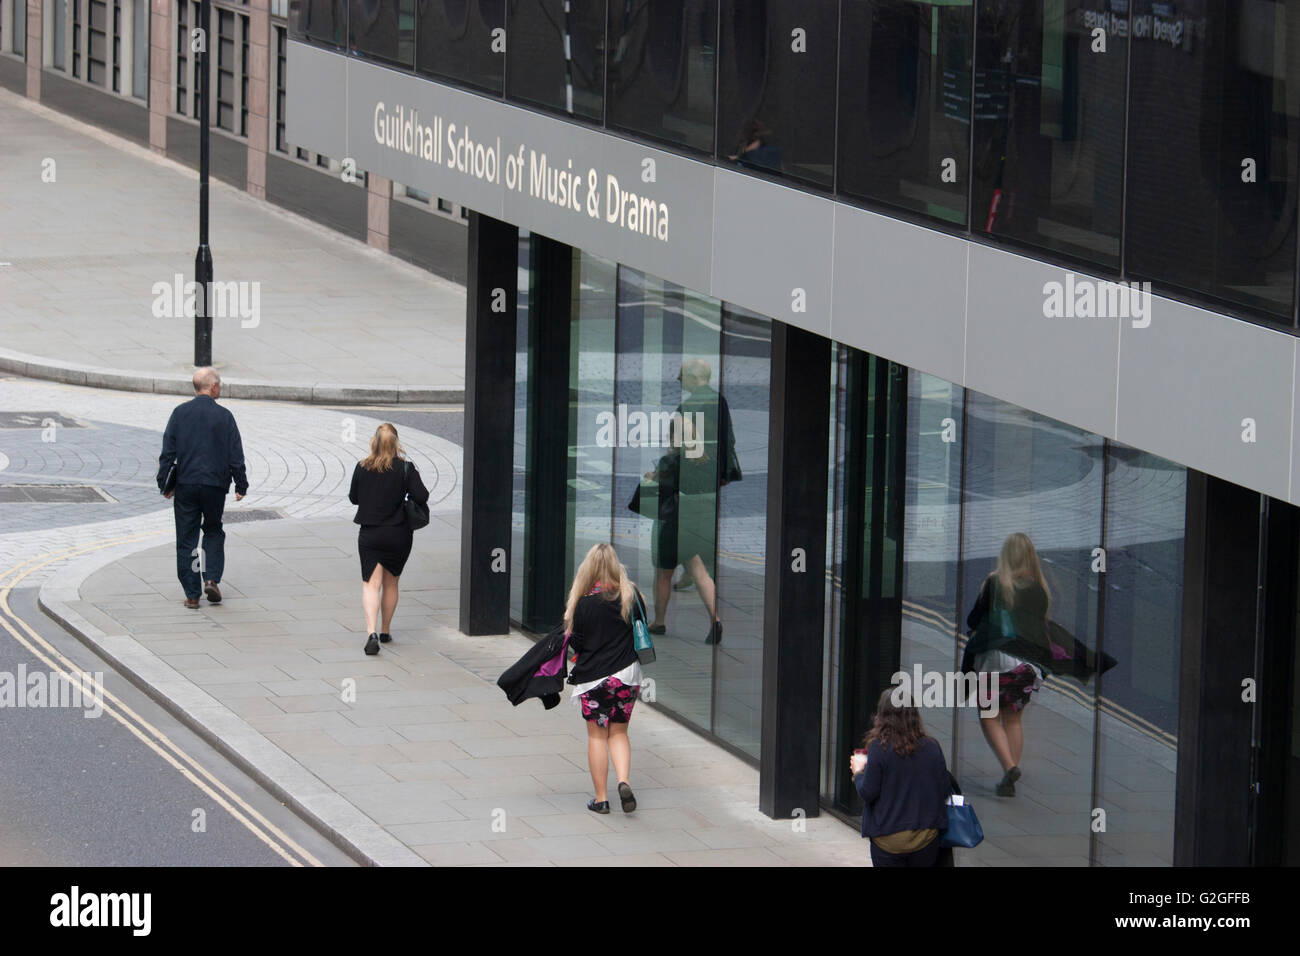 Guildhall School of Music and Drama, Moorgate, London Stock Photo